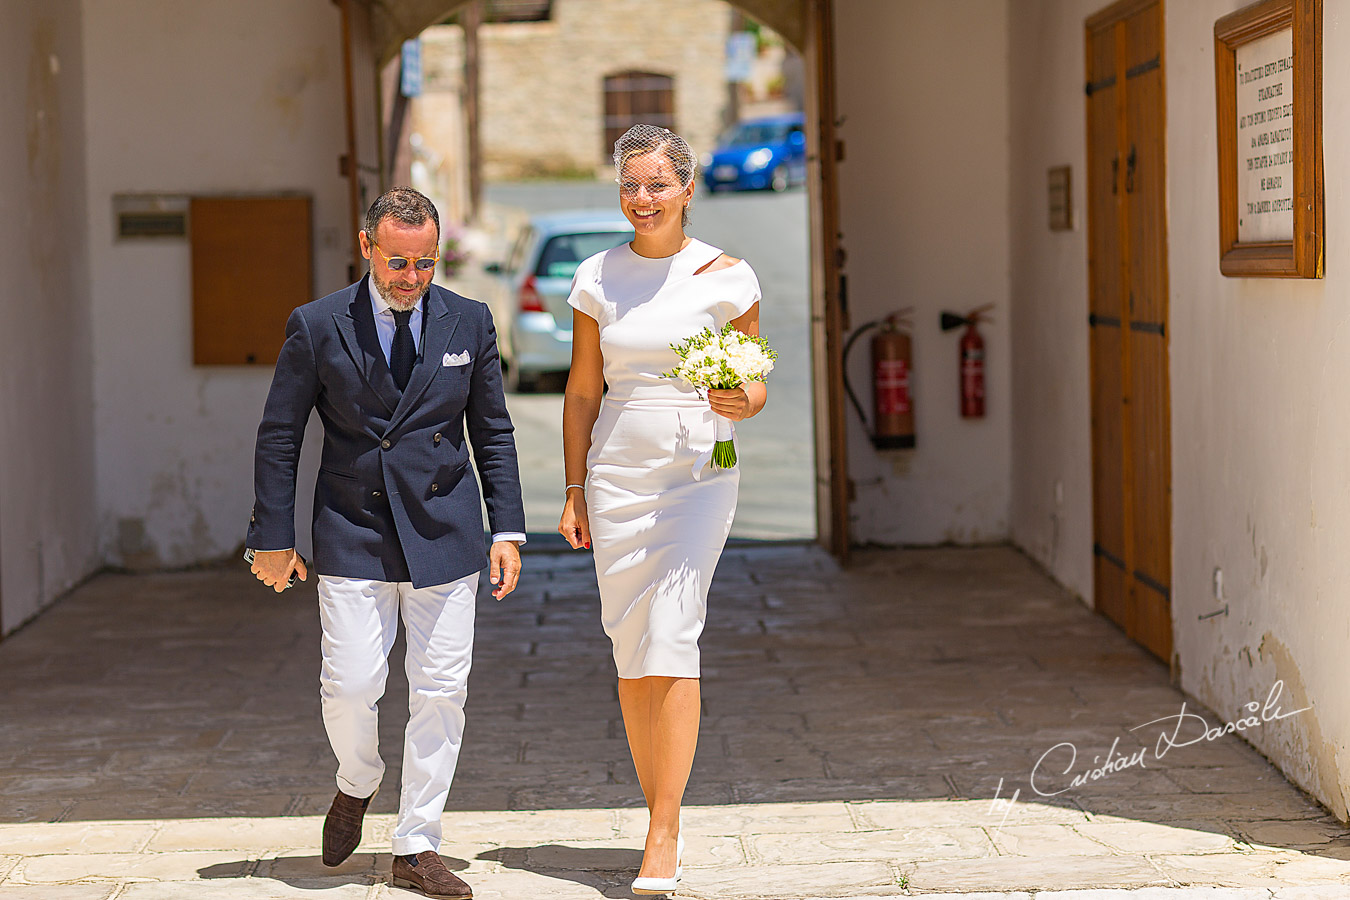 The bride and the groom arrive at Germasoia Cultural Center in Limassol.